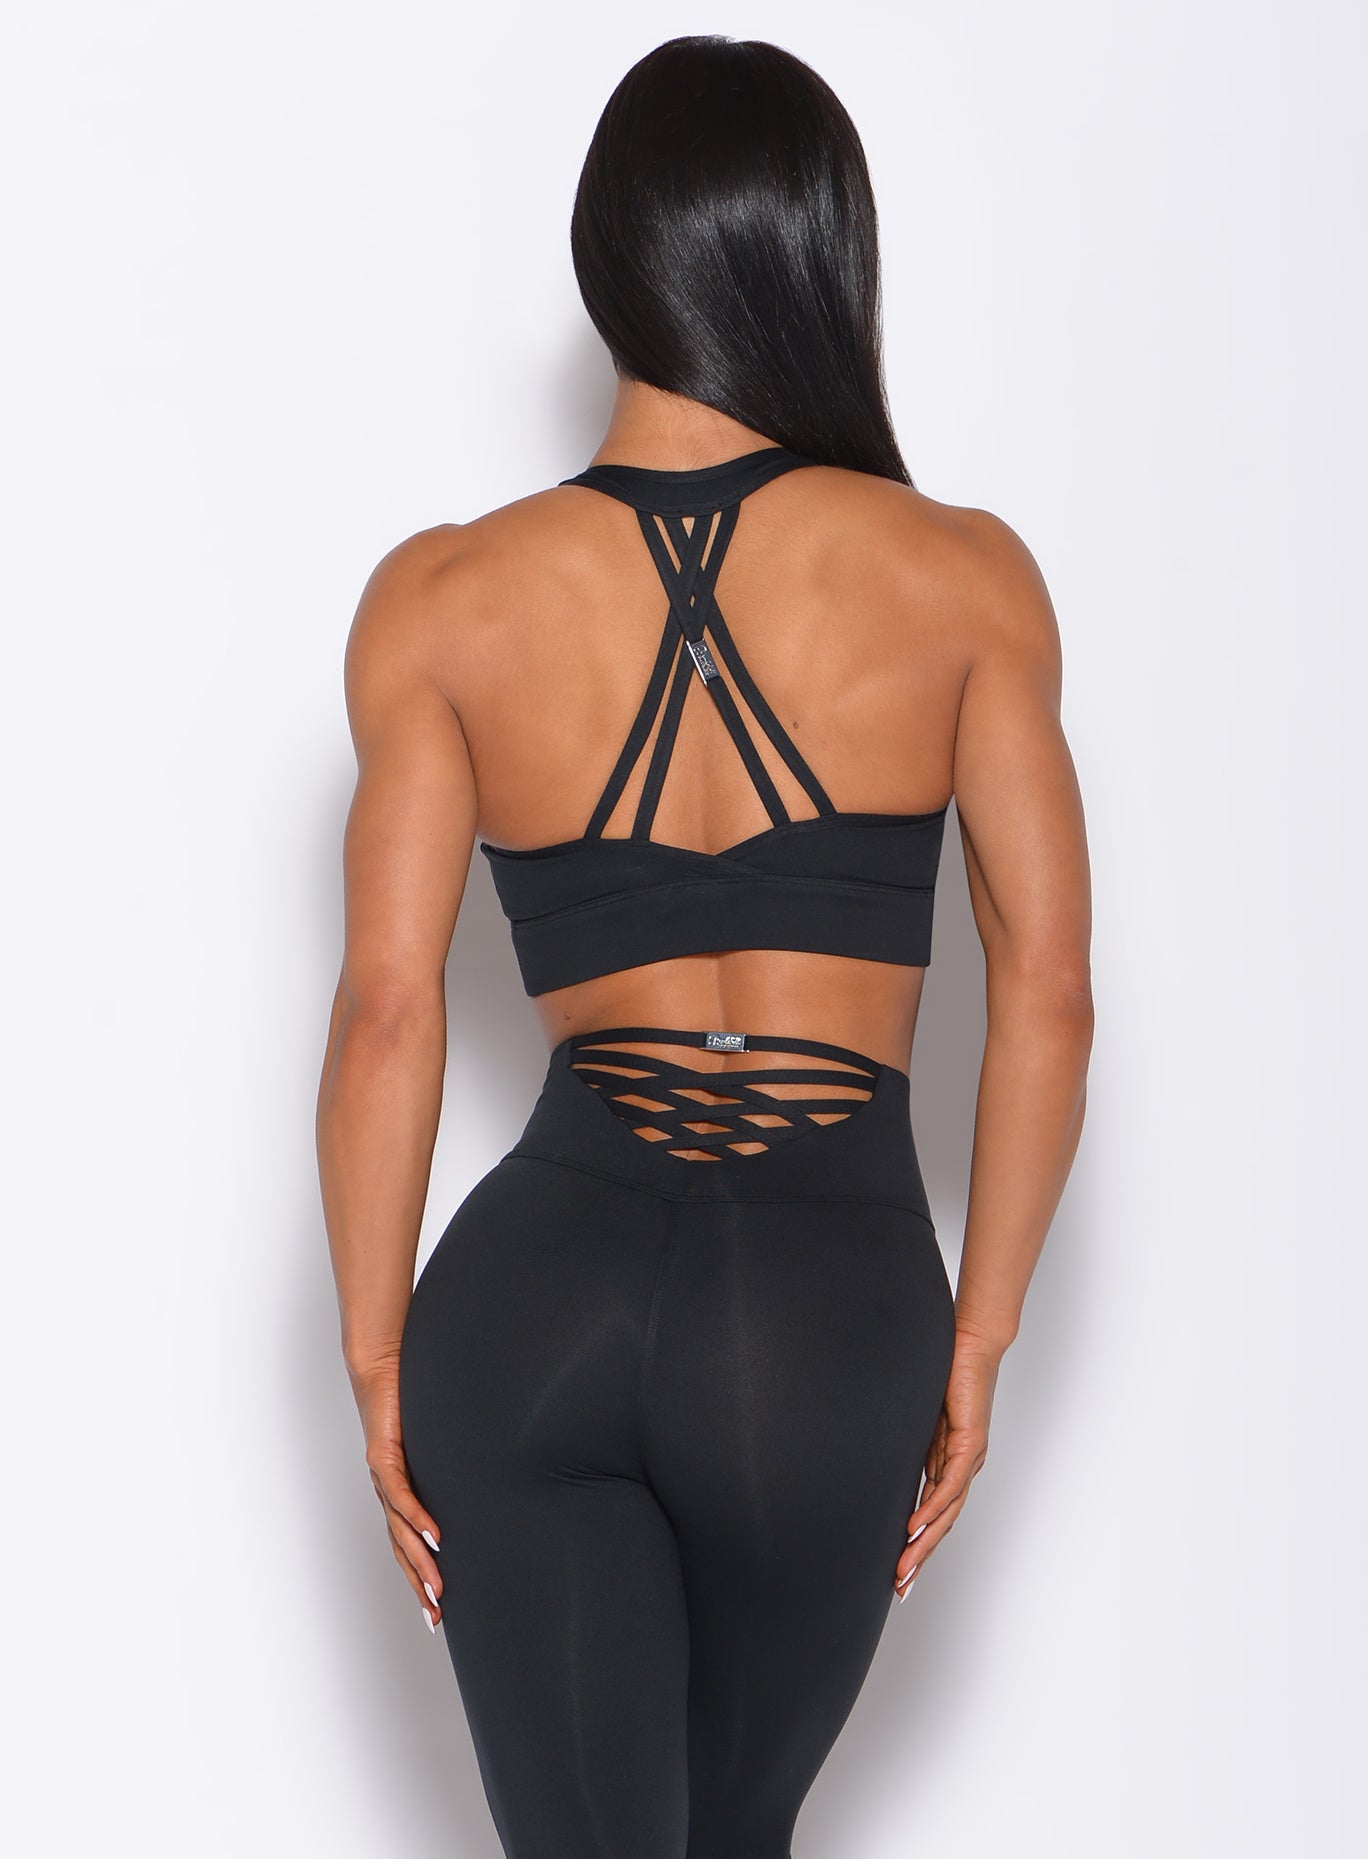 Back profile view of a model in our black rival sports bra and a matching leggings